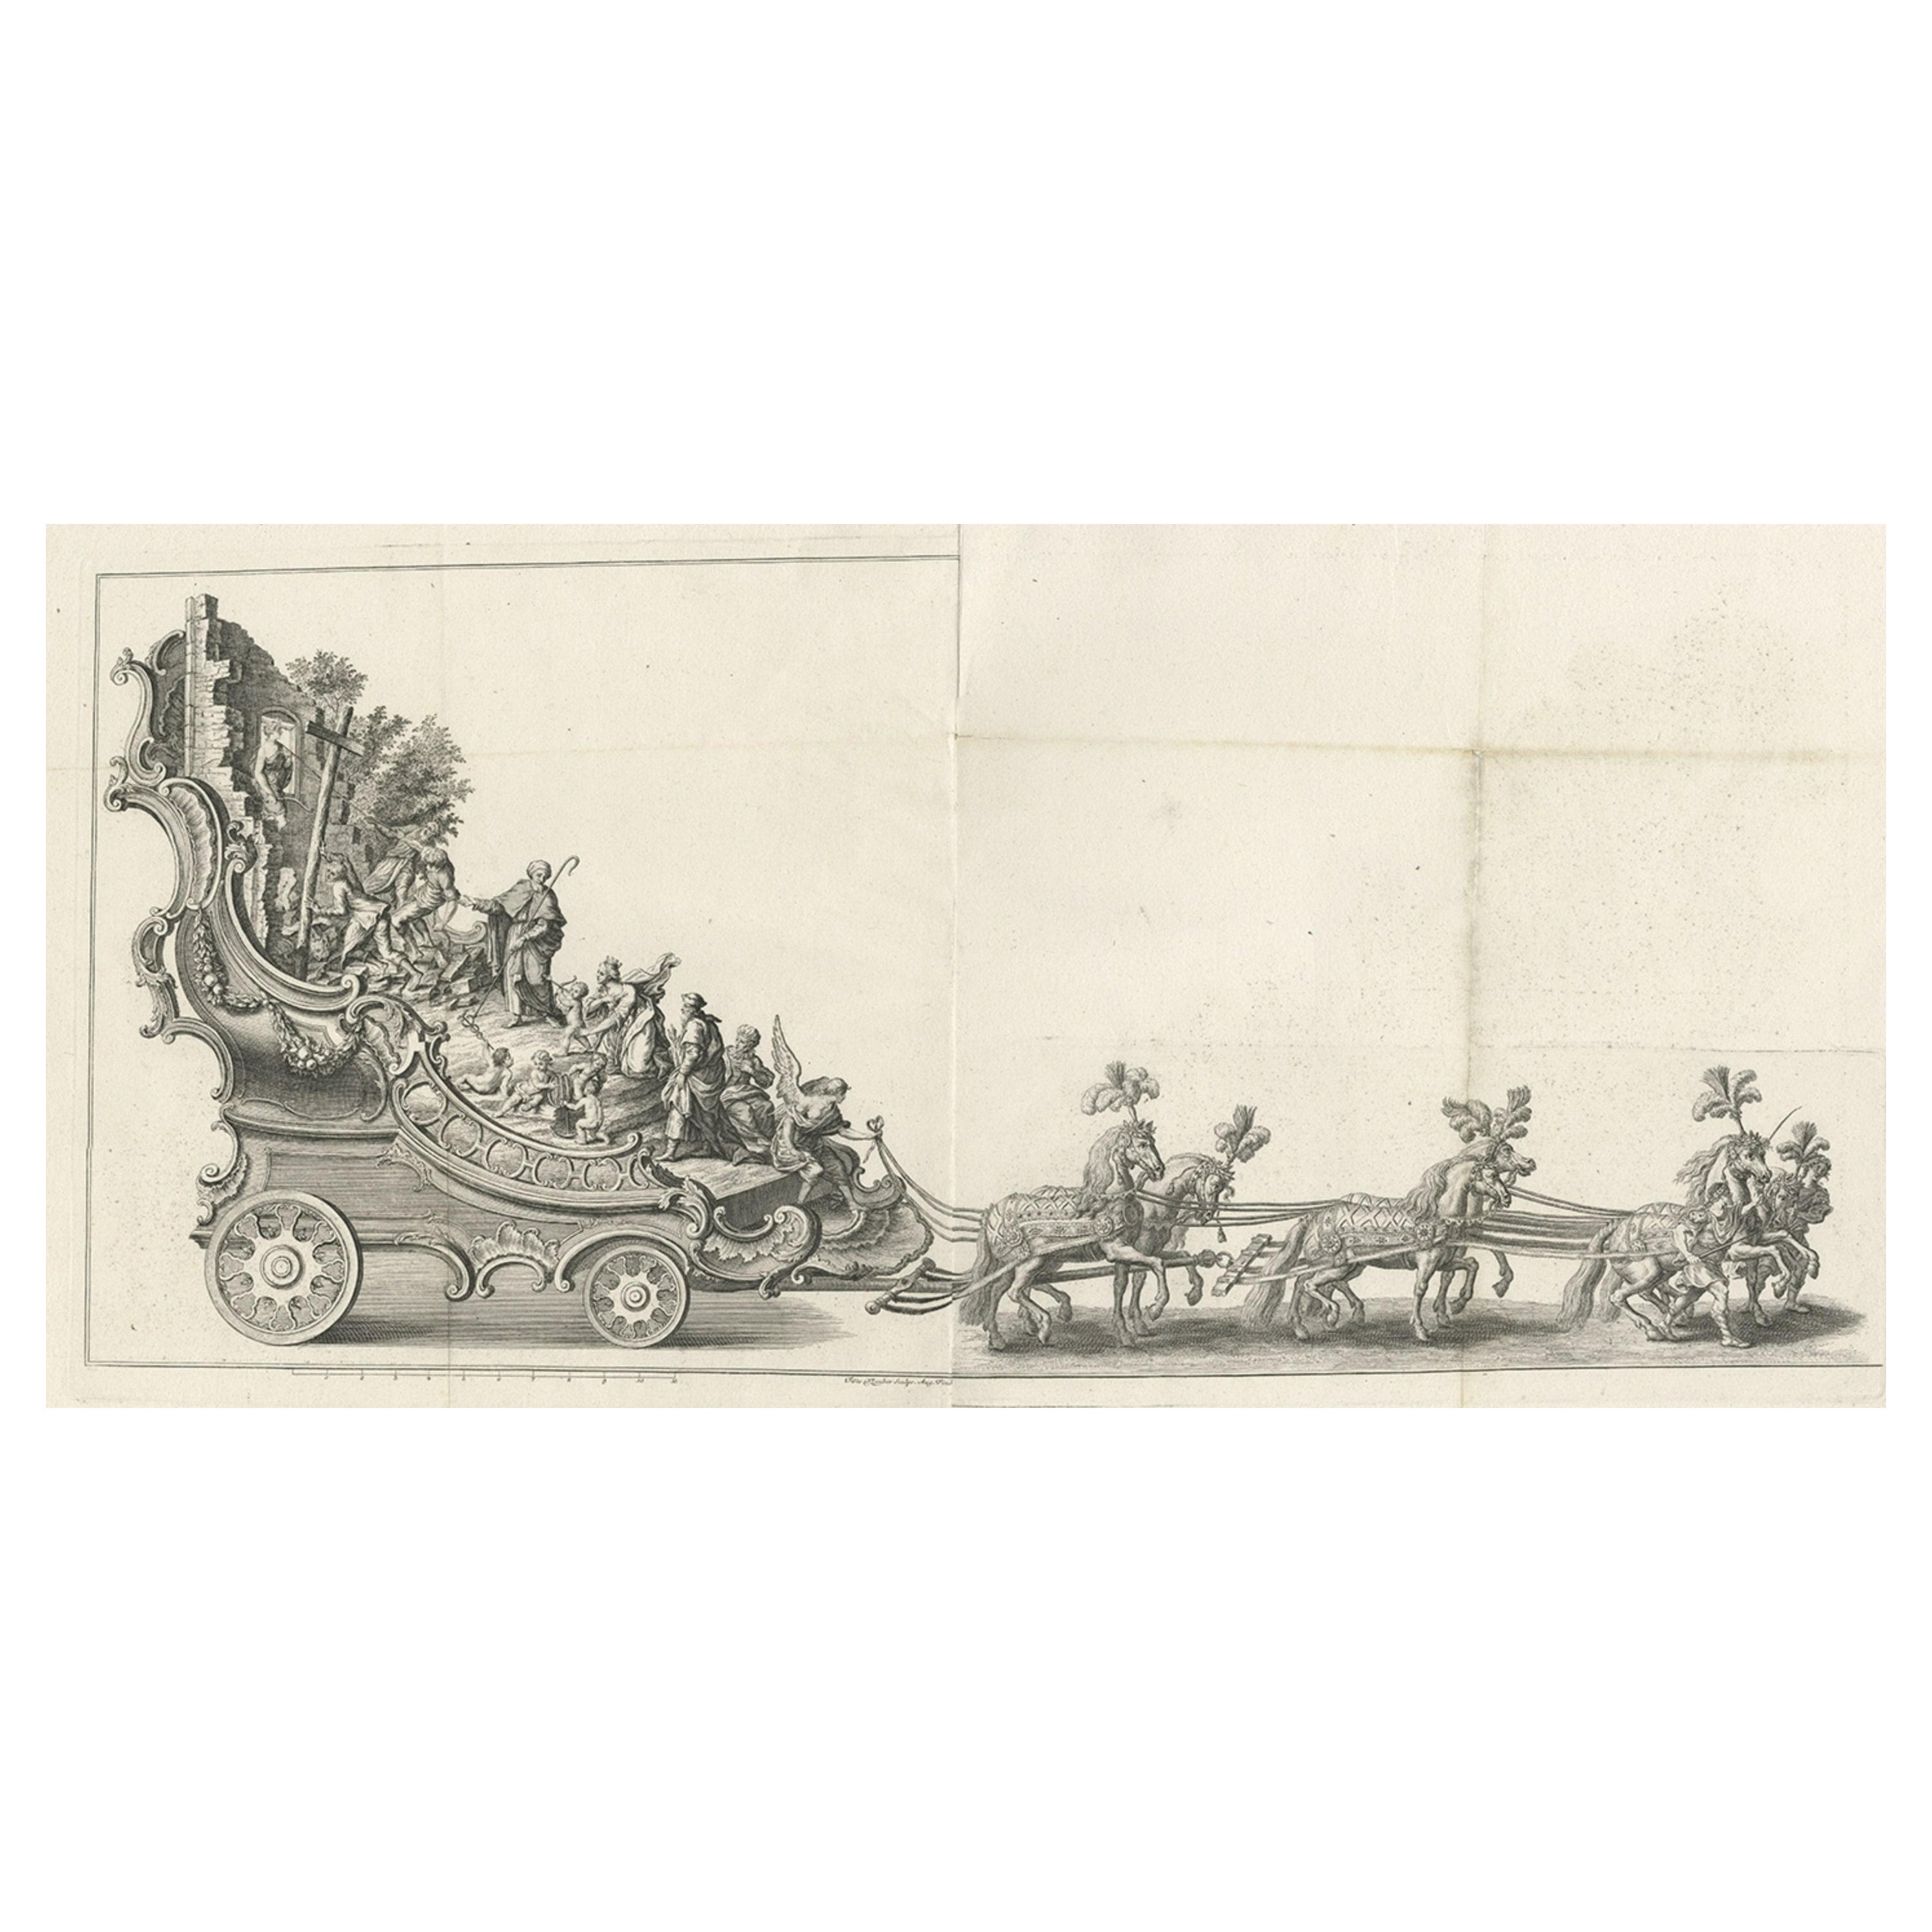 Remarkable Antique Print of a Horse Drawn Float with Religious Figures, 1775 For Sale